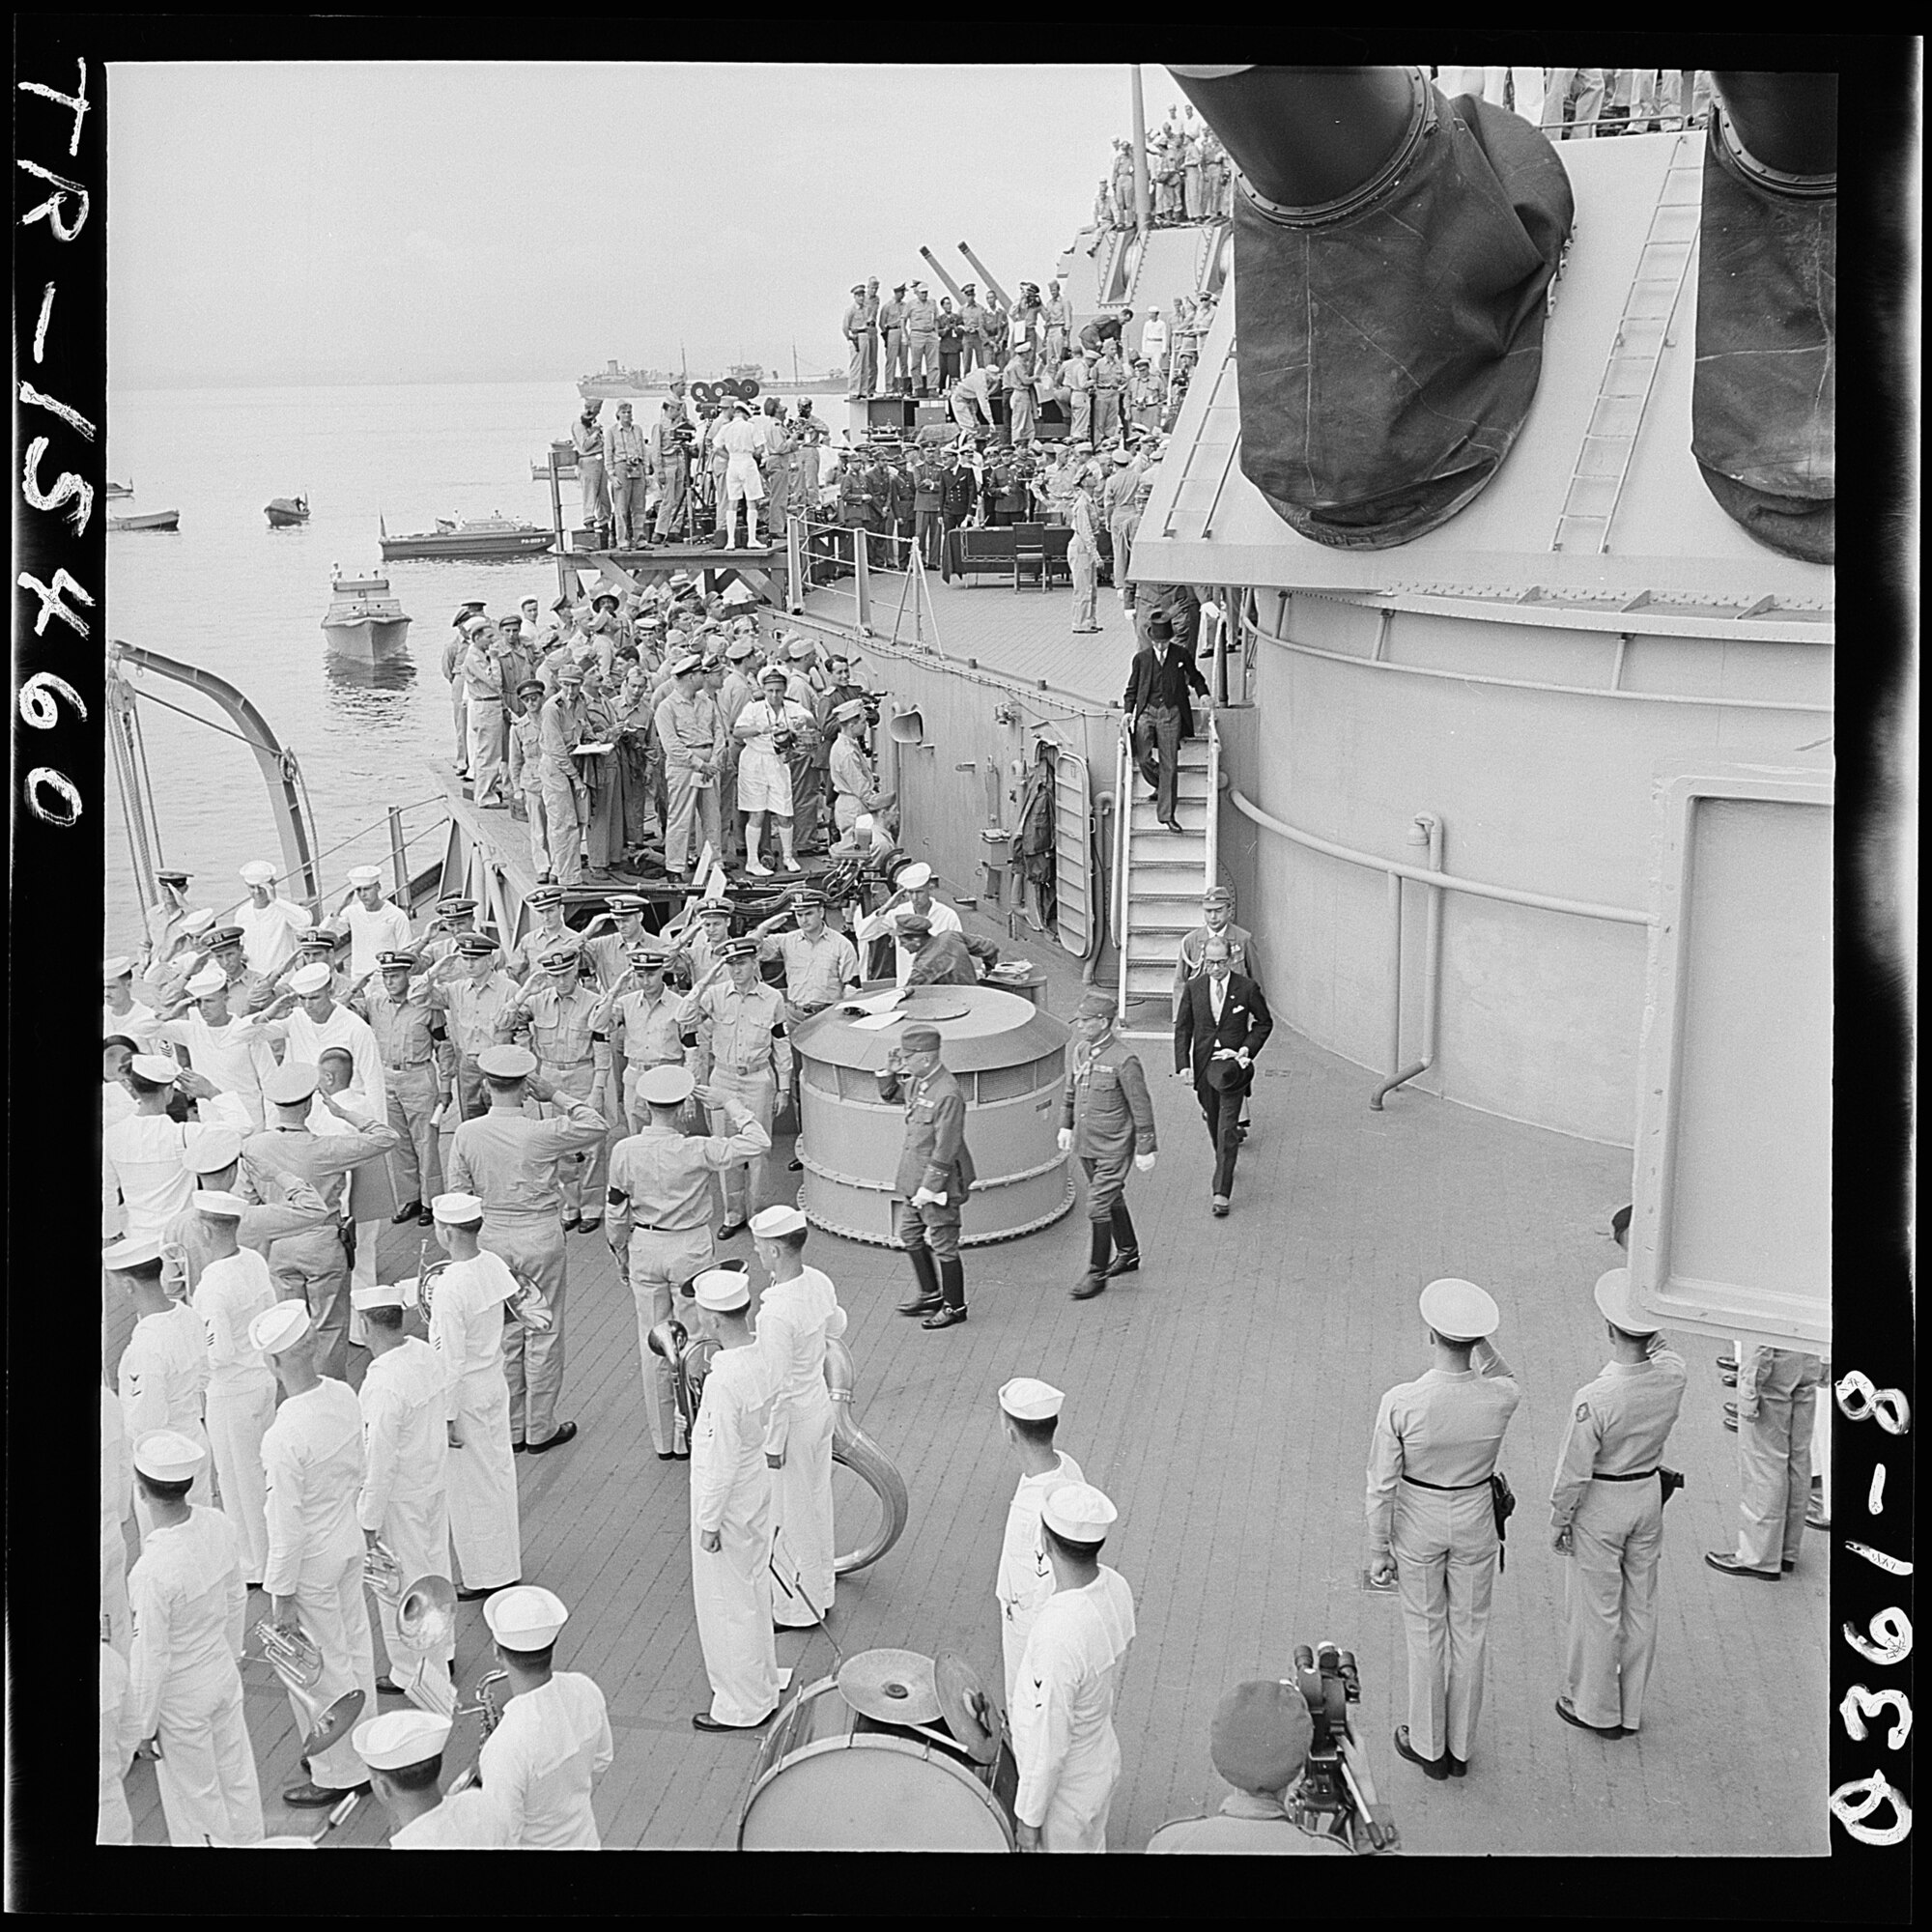 The Japanese envoy leaves the USS Missouri following the signing of the formal surrender Sept.2, 2021. Today, the U.S. commemorates the victory in Japan, or VJ Day, on September 2. (U.S. Navy file photo)